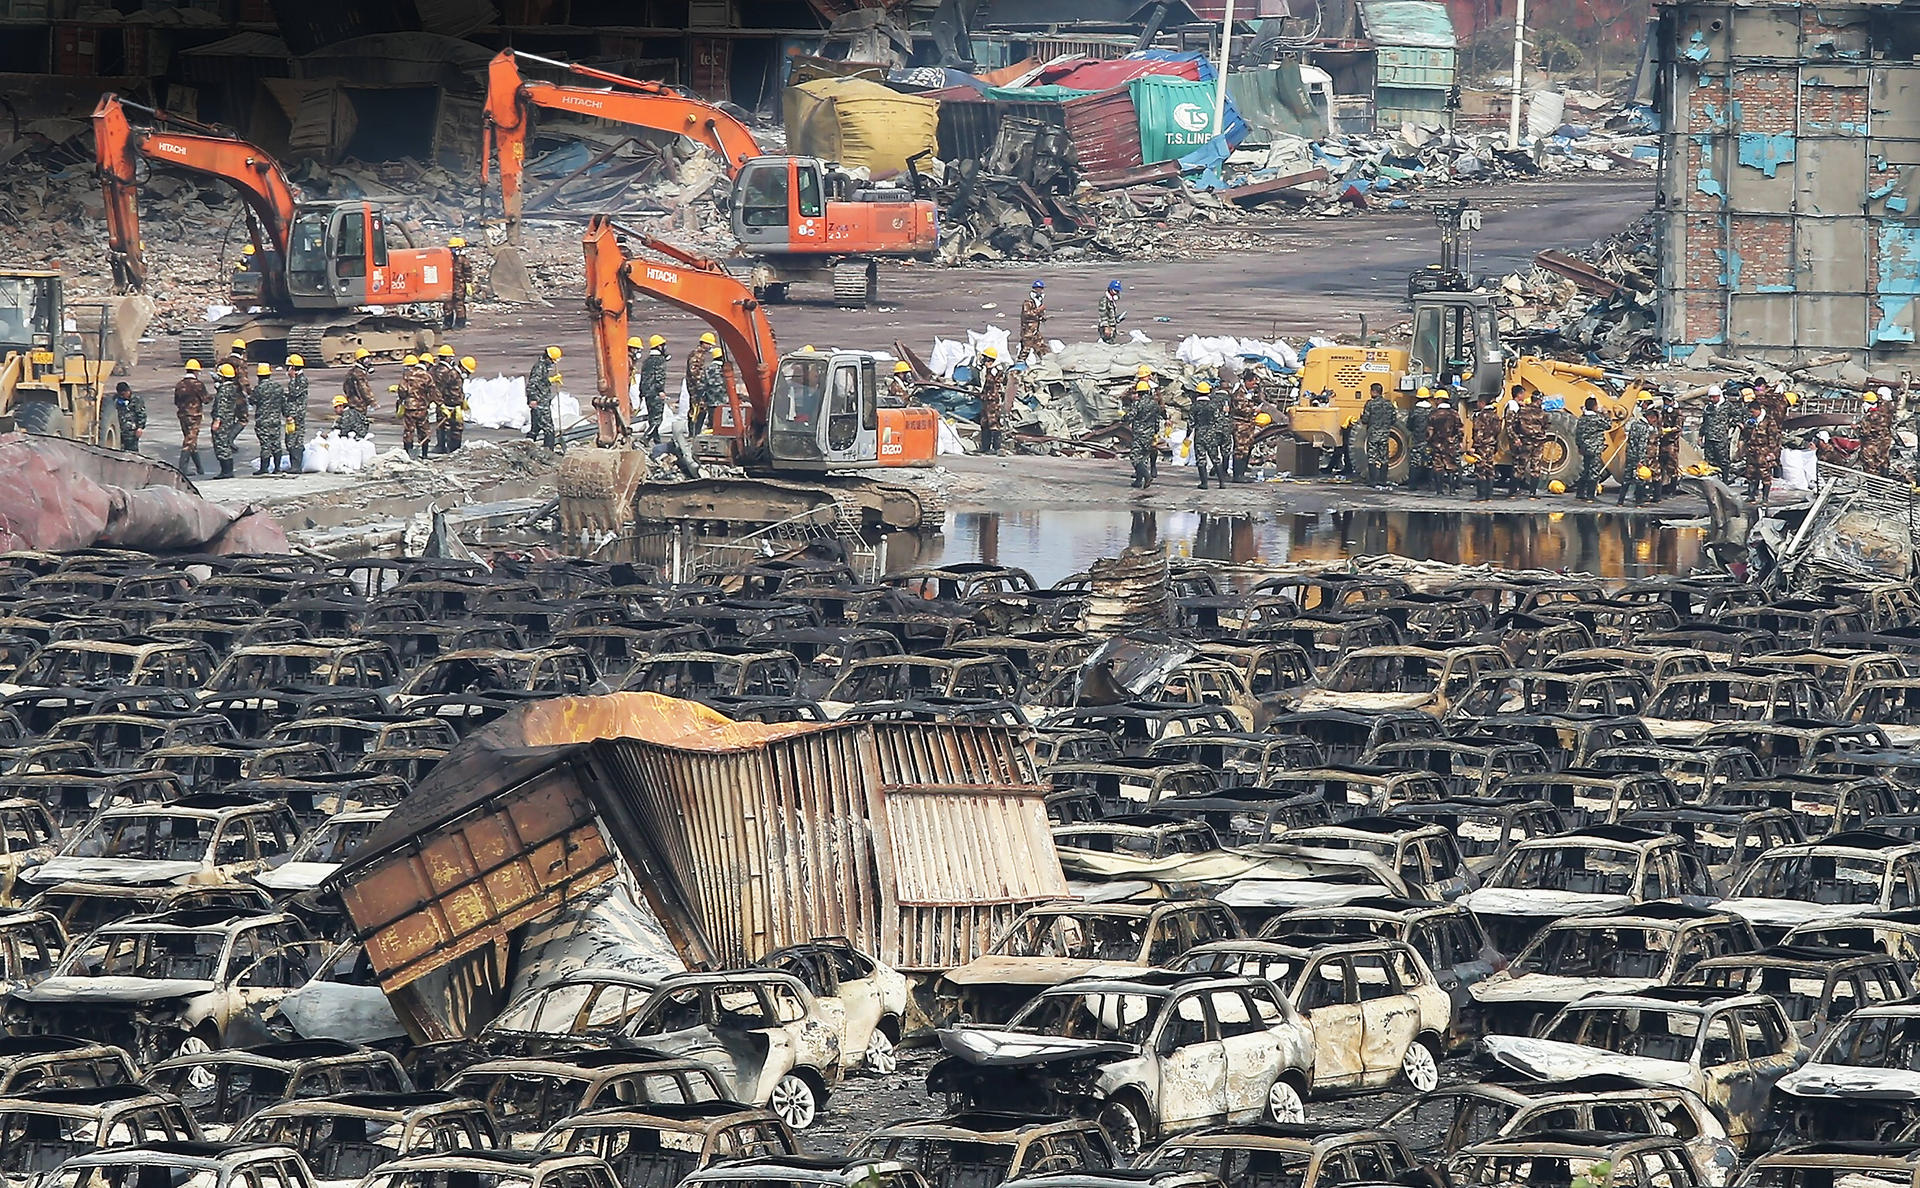 Thousands of wrecked cars and containers litter the blast site in Tianjin, where officials are involved in a desperate search for spilled sodium cyanide. Photo: KY Cheng